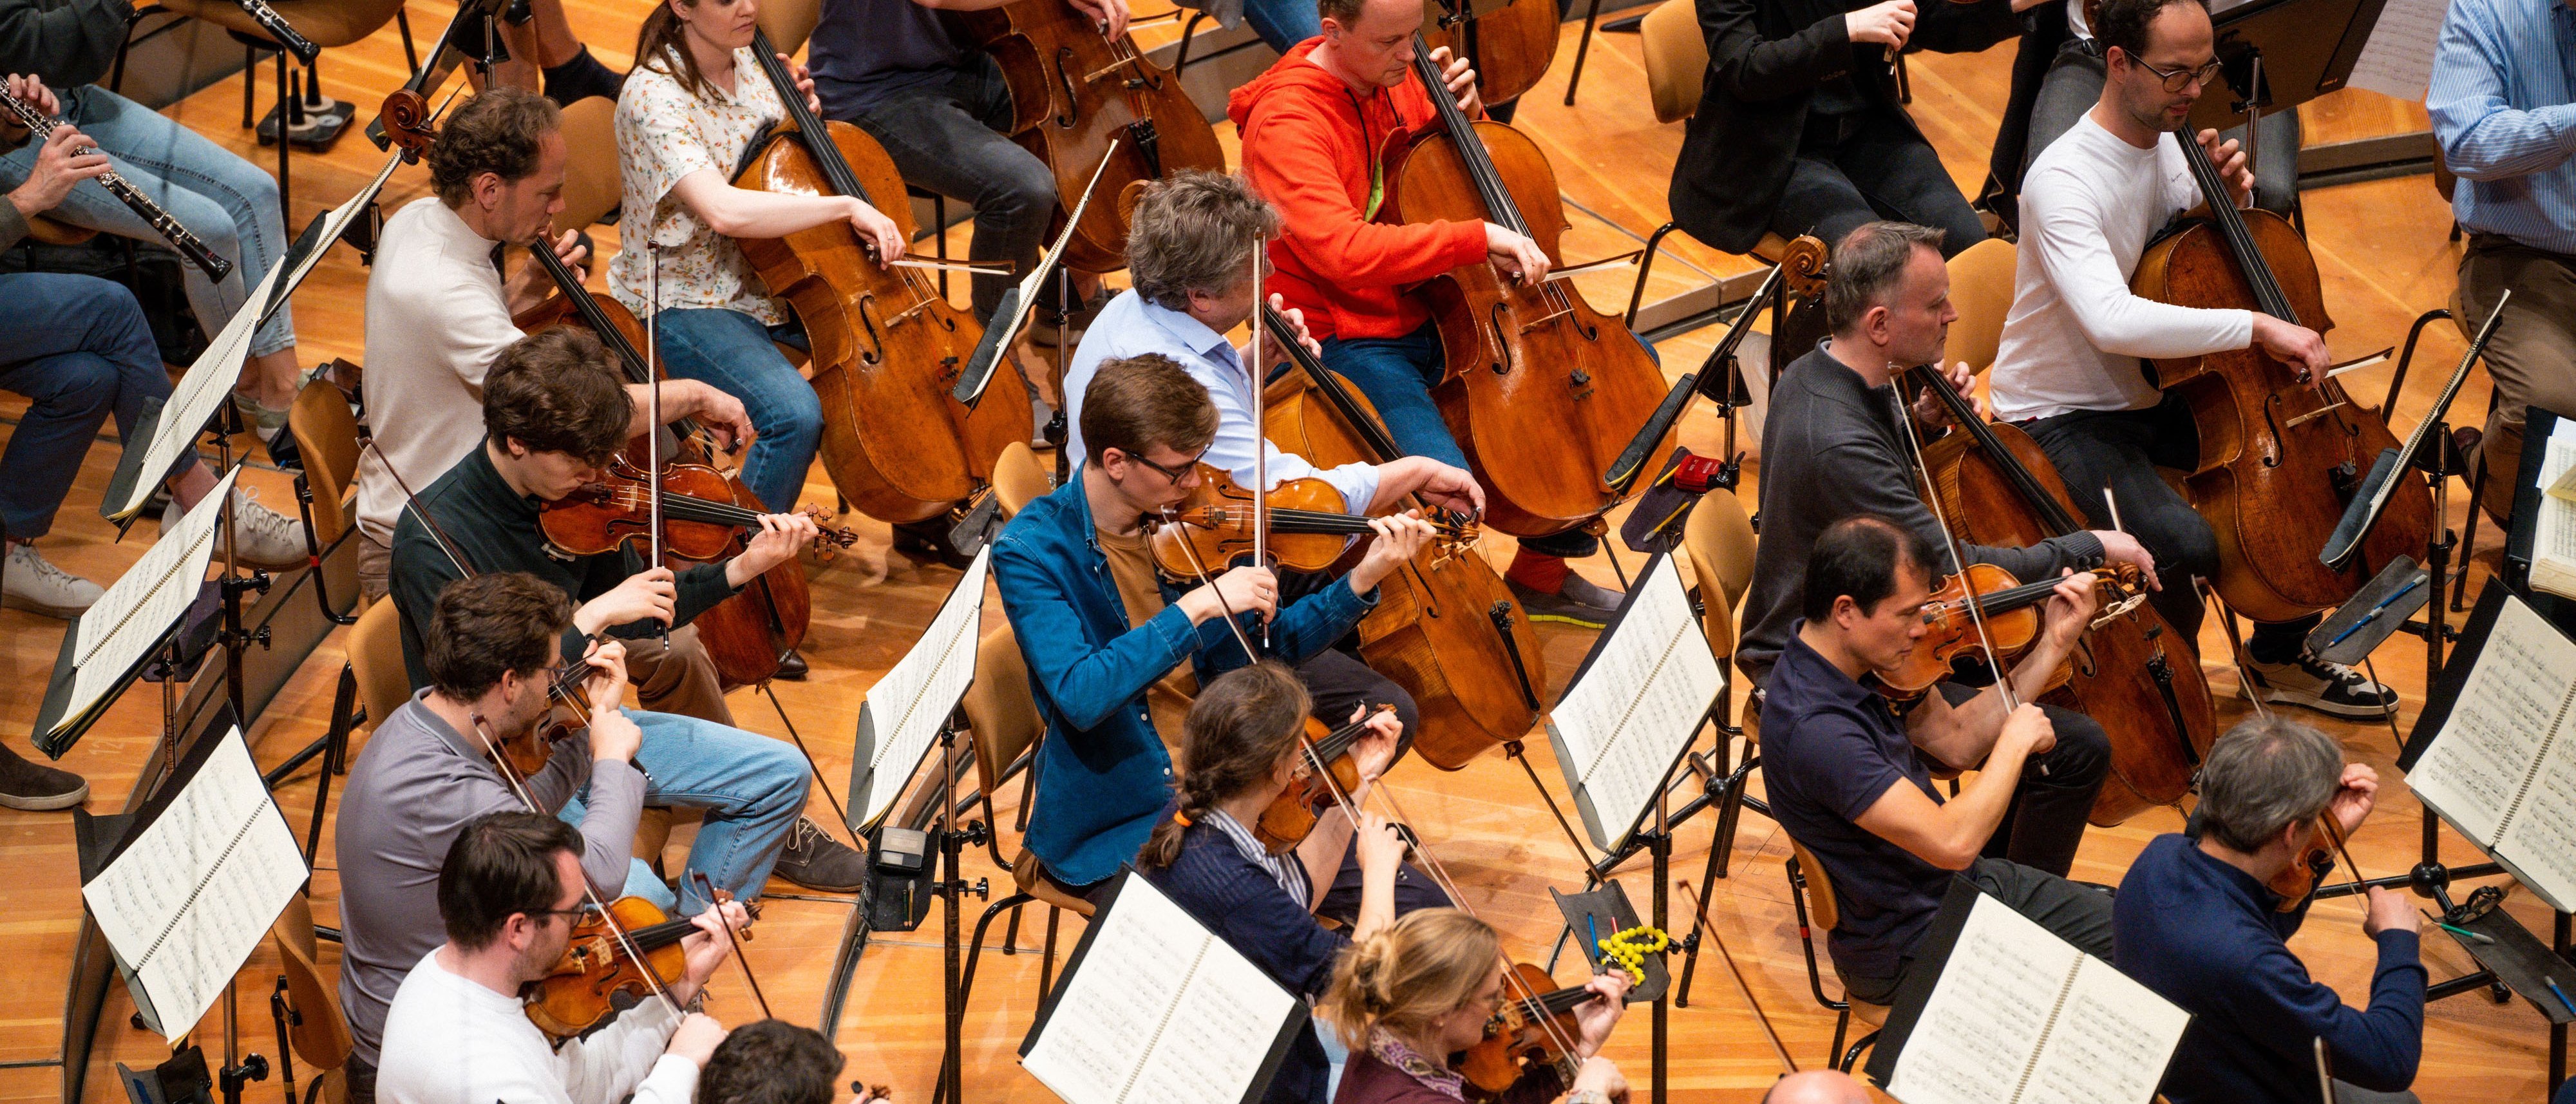 Group of musicians in the orchestra playing music at a rehearsal